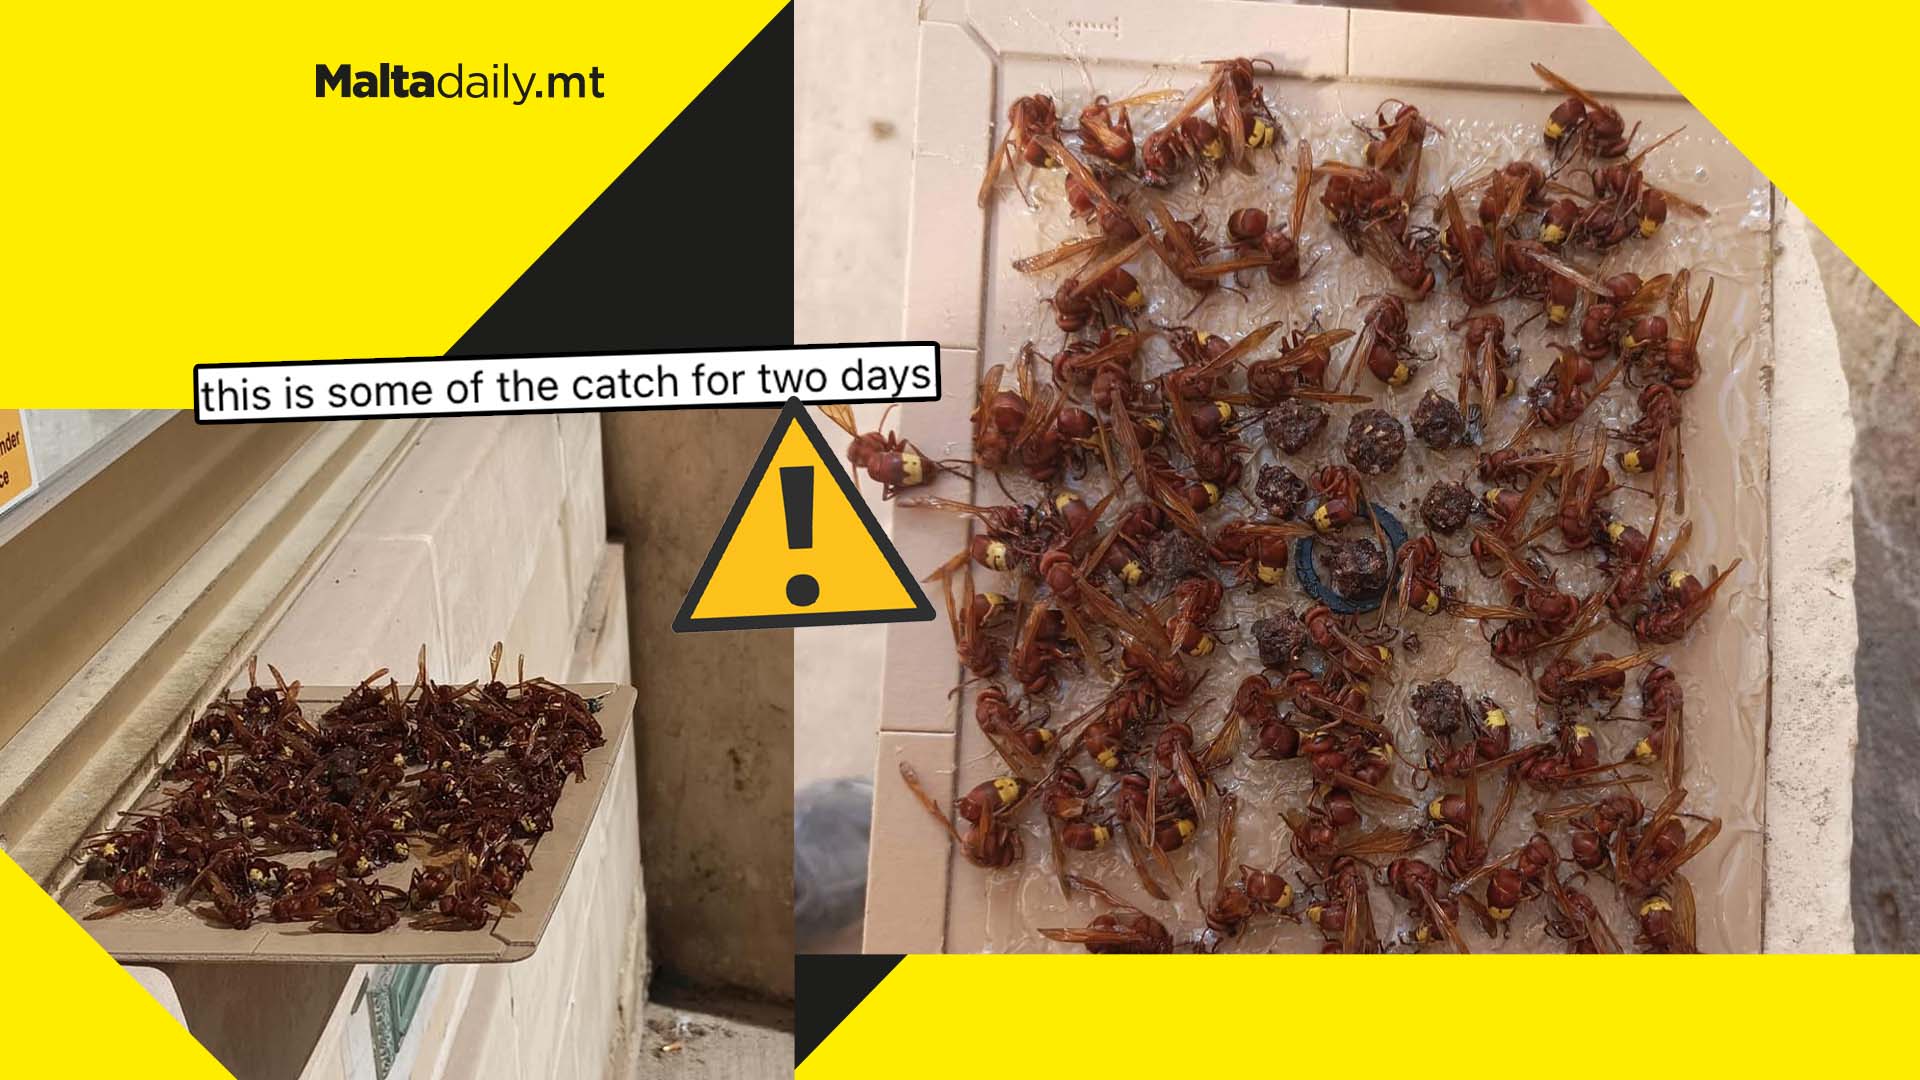 Homeowner shows critical state of Malta's hornet infestation in alarming trap photos